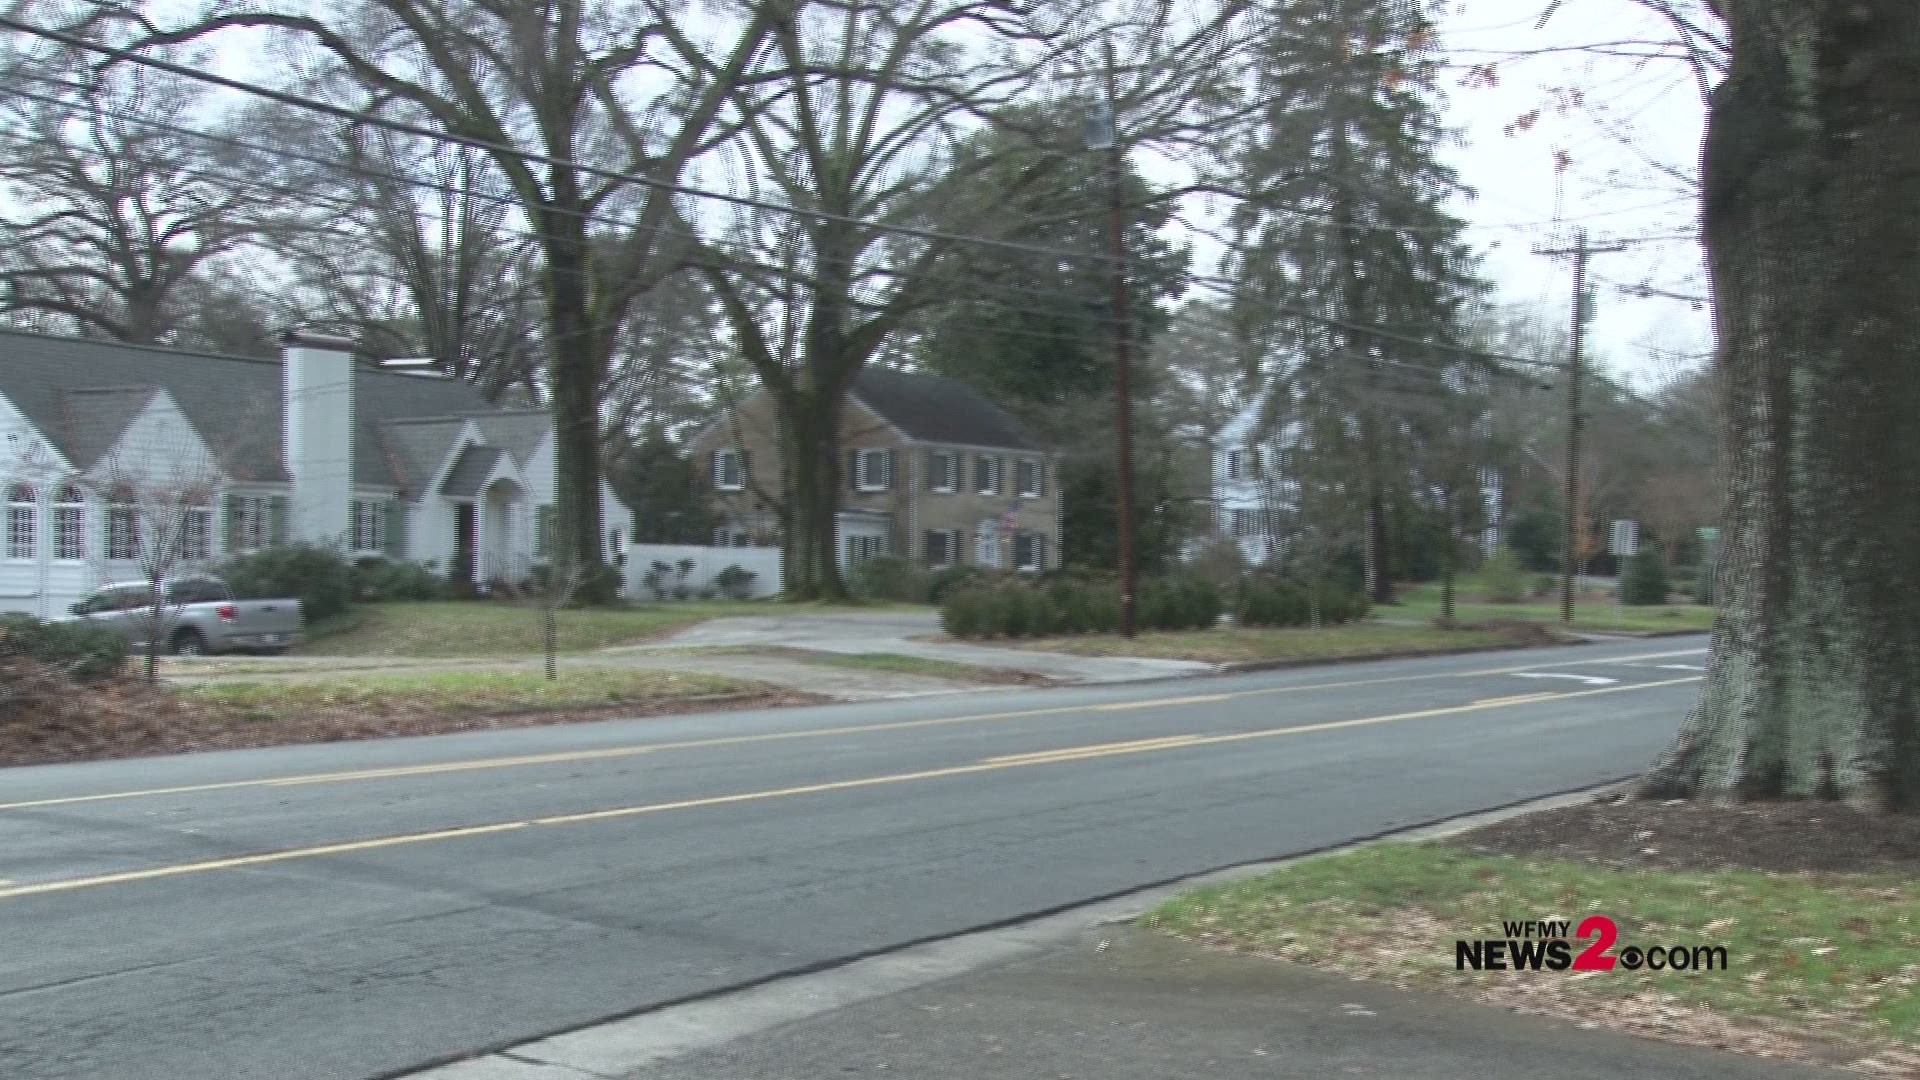 Police say an armed man forced his way inside the house after asking for change.